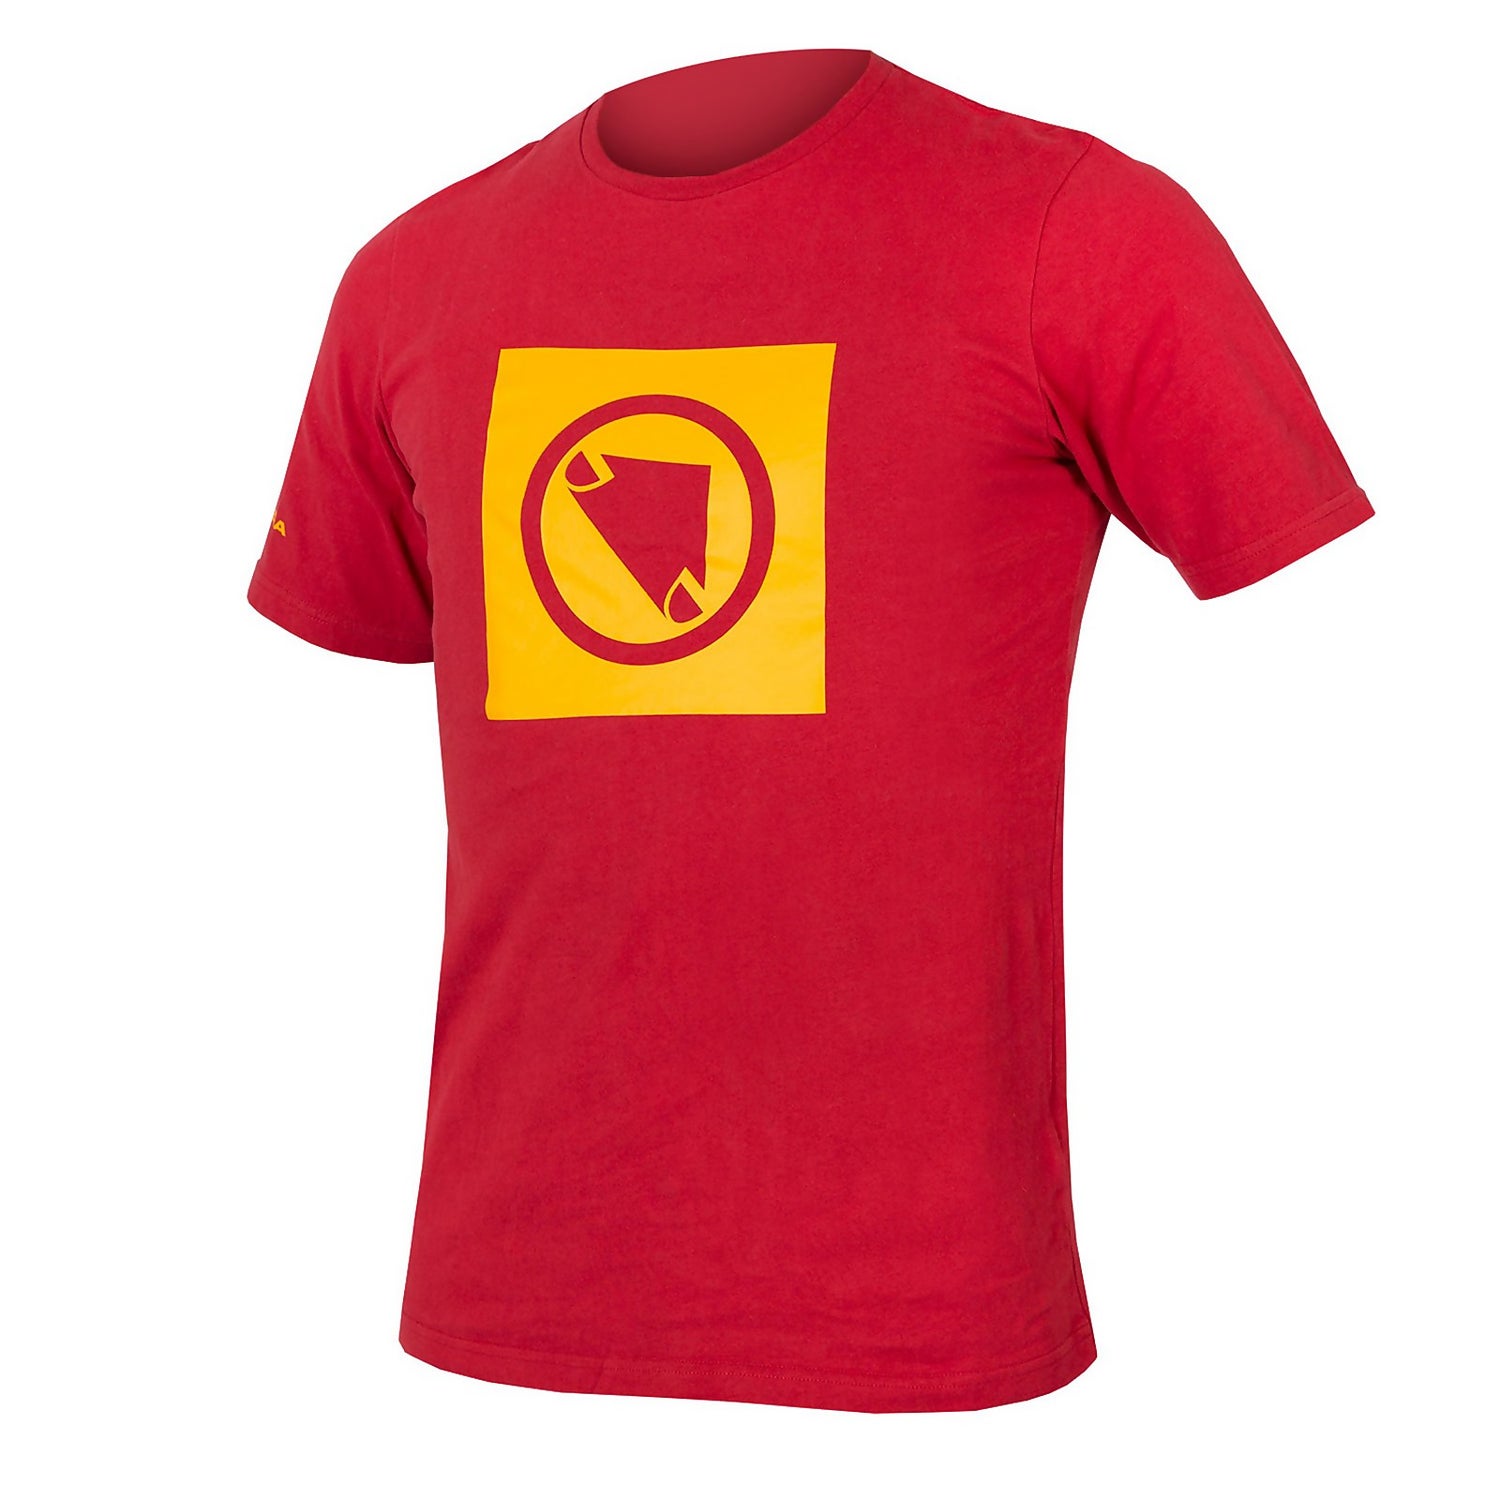 One Clan Carbon Icon T - Red - XL